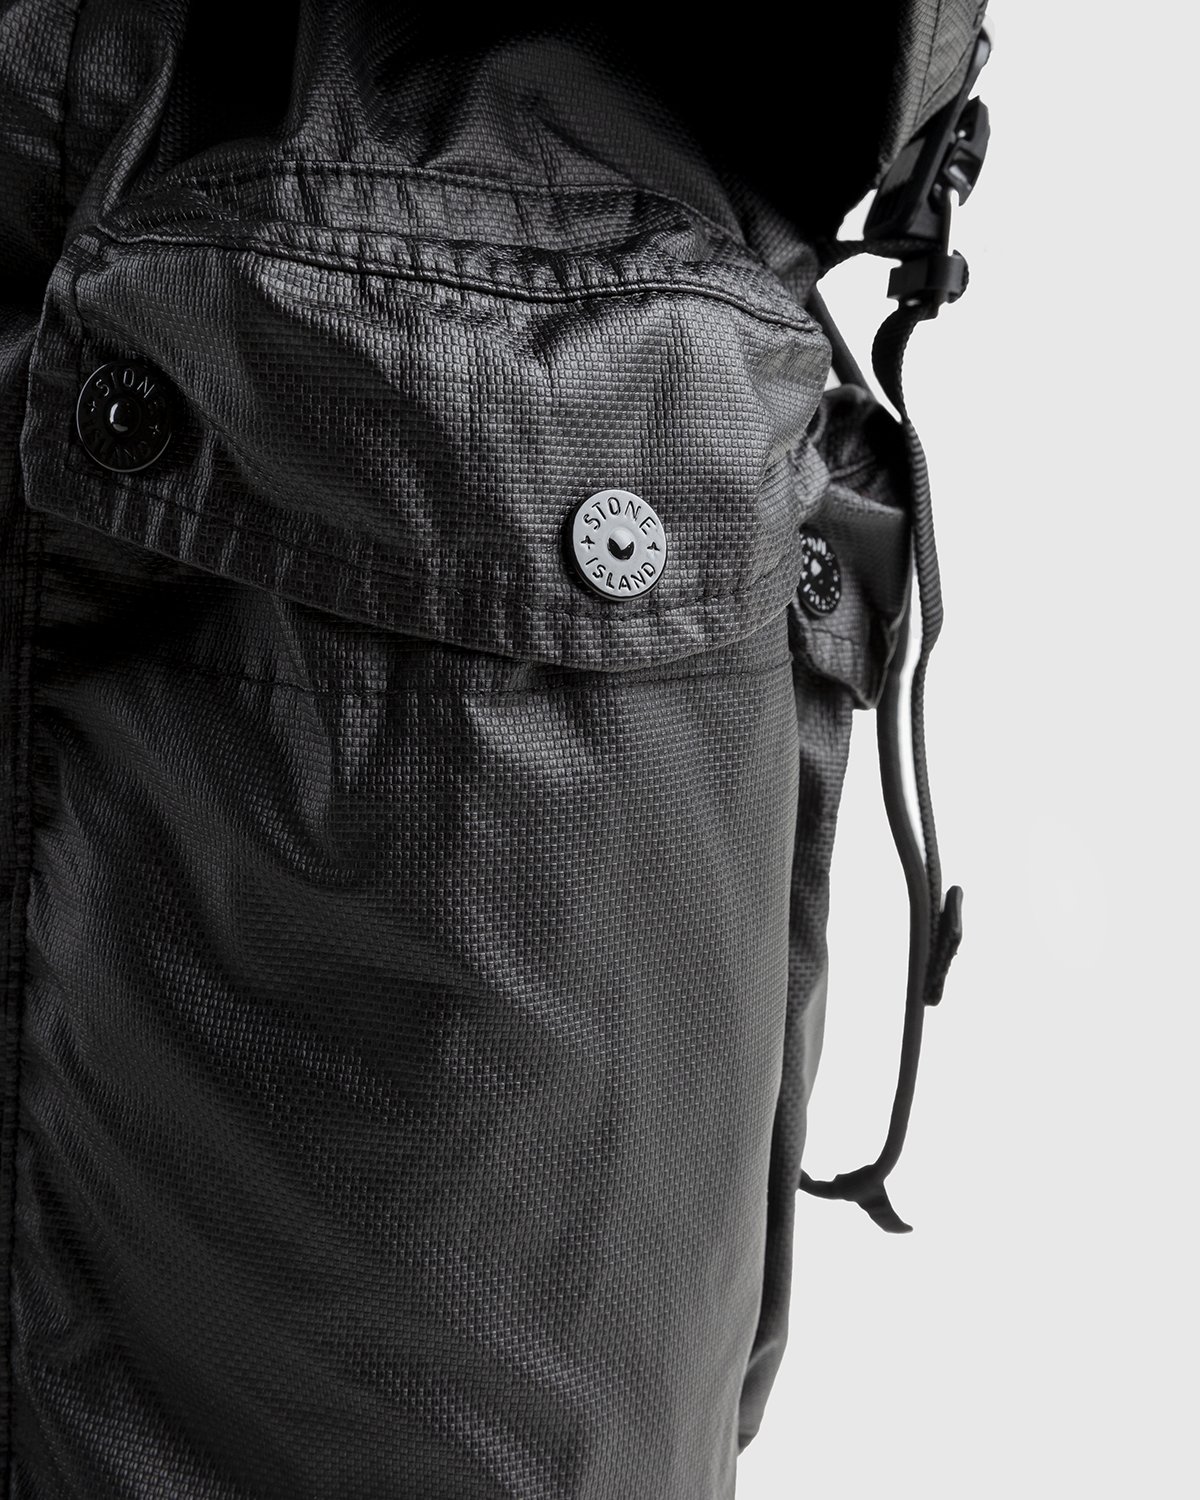 Stone Island - Dyed Backpack Black - Accessories - Black - Image 7